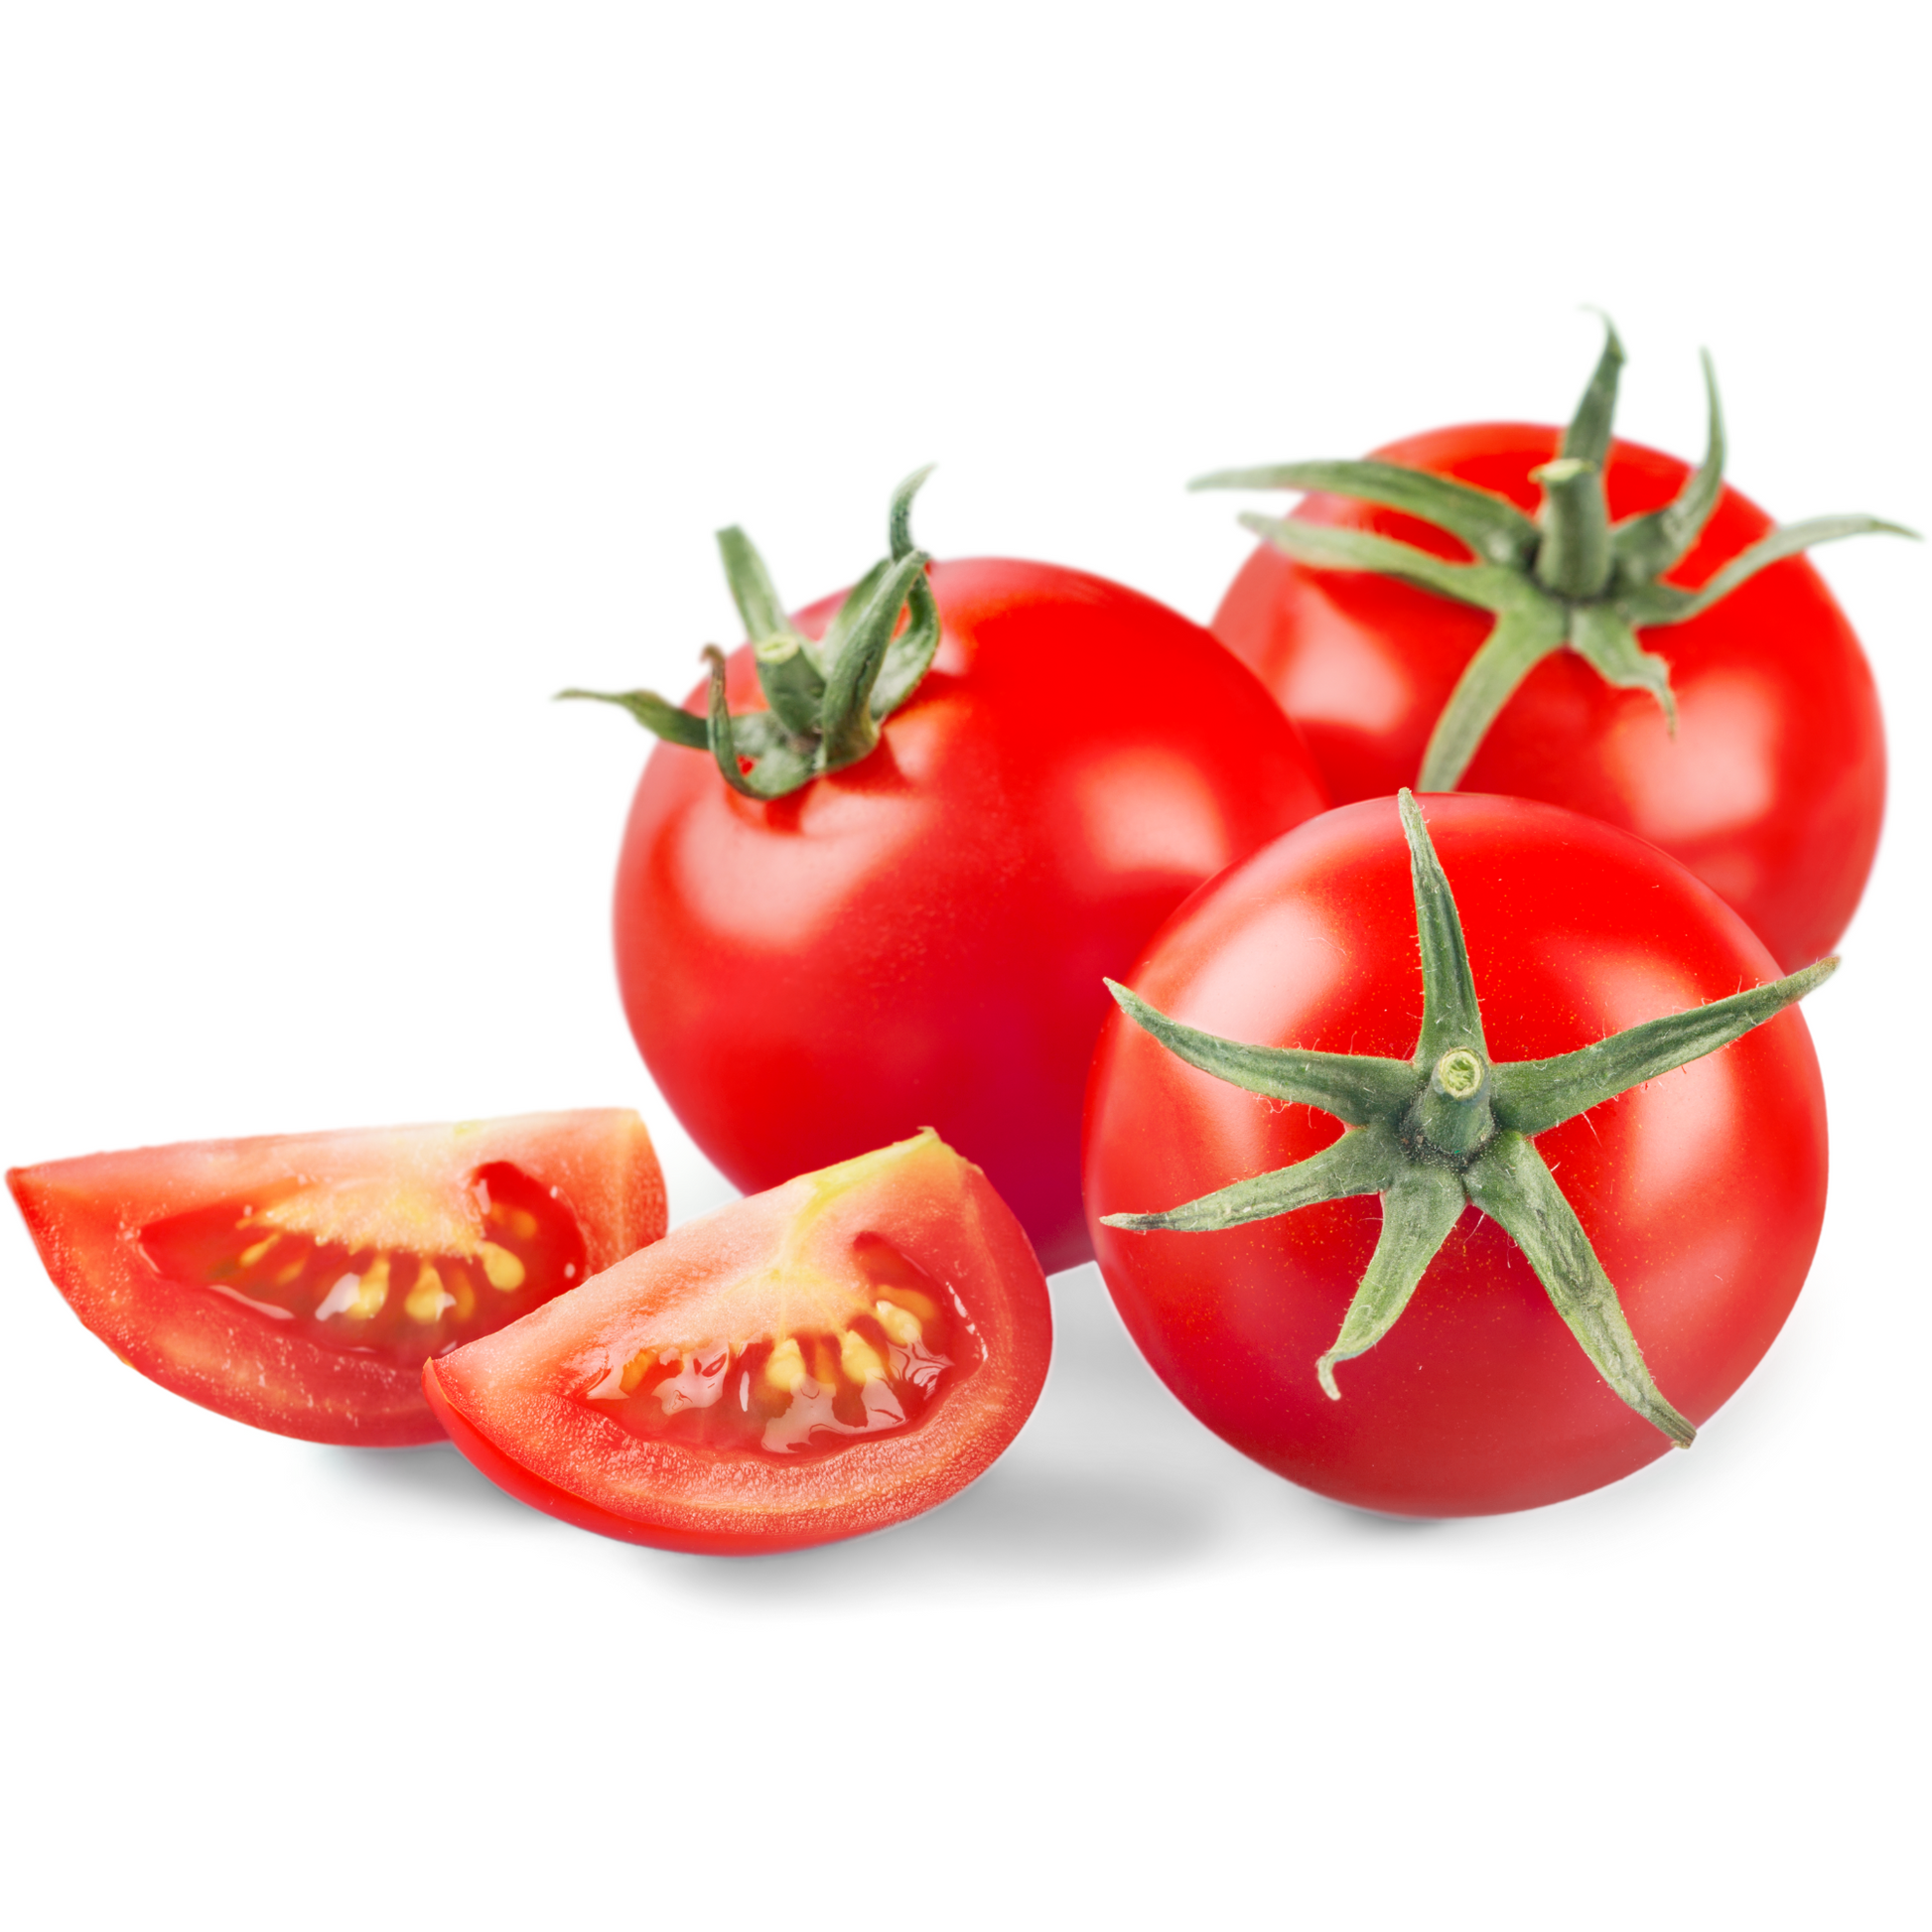 Sliced Marglobe tomatoes displayed on a white background